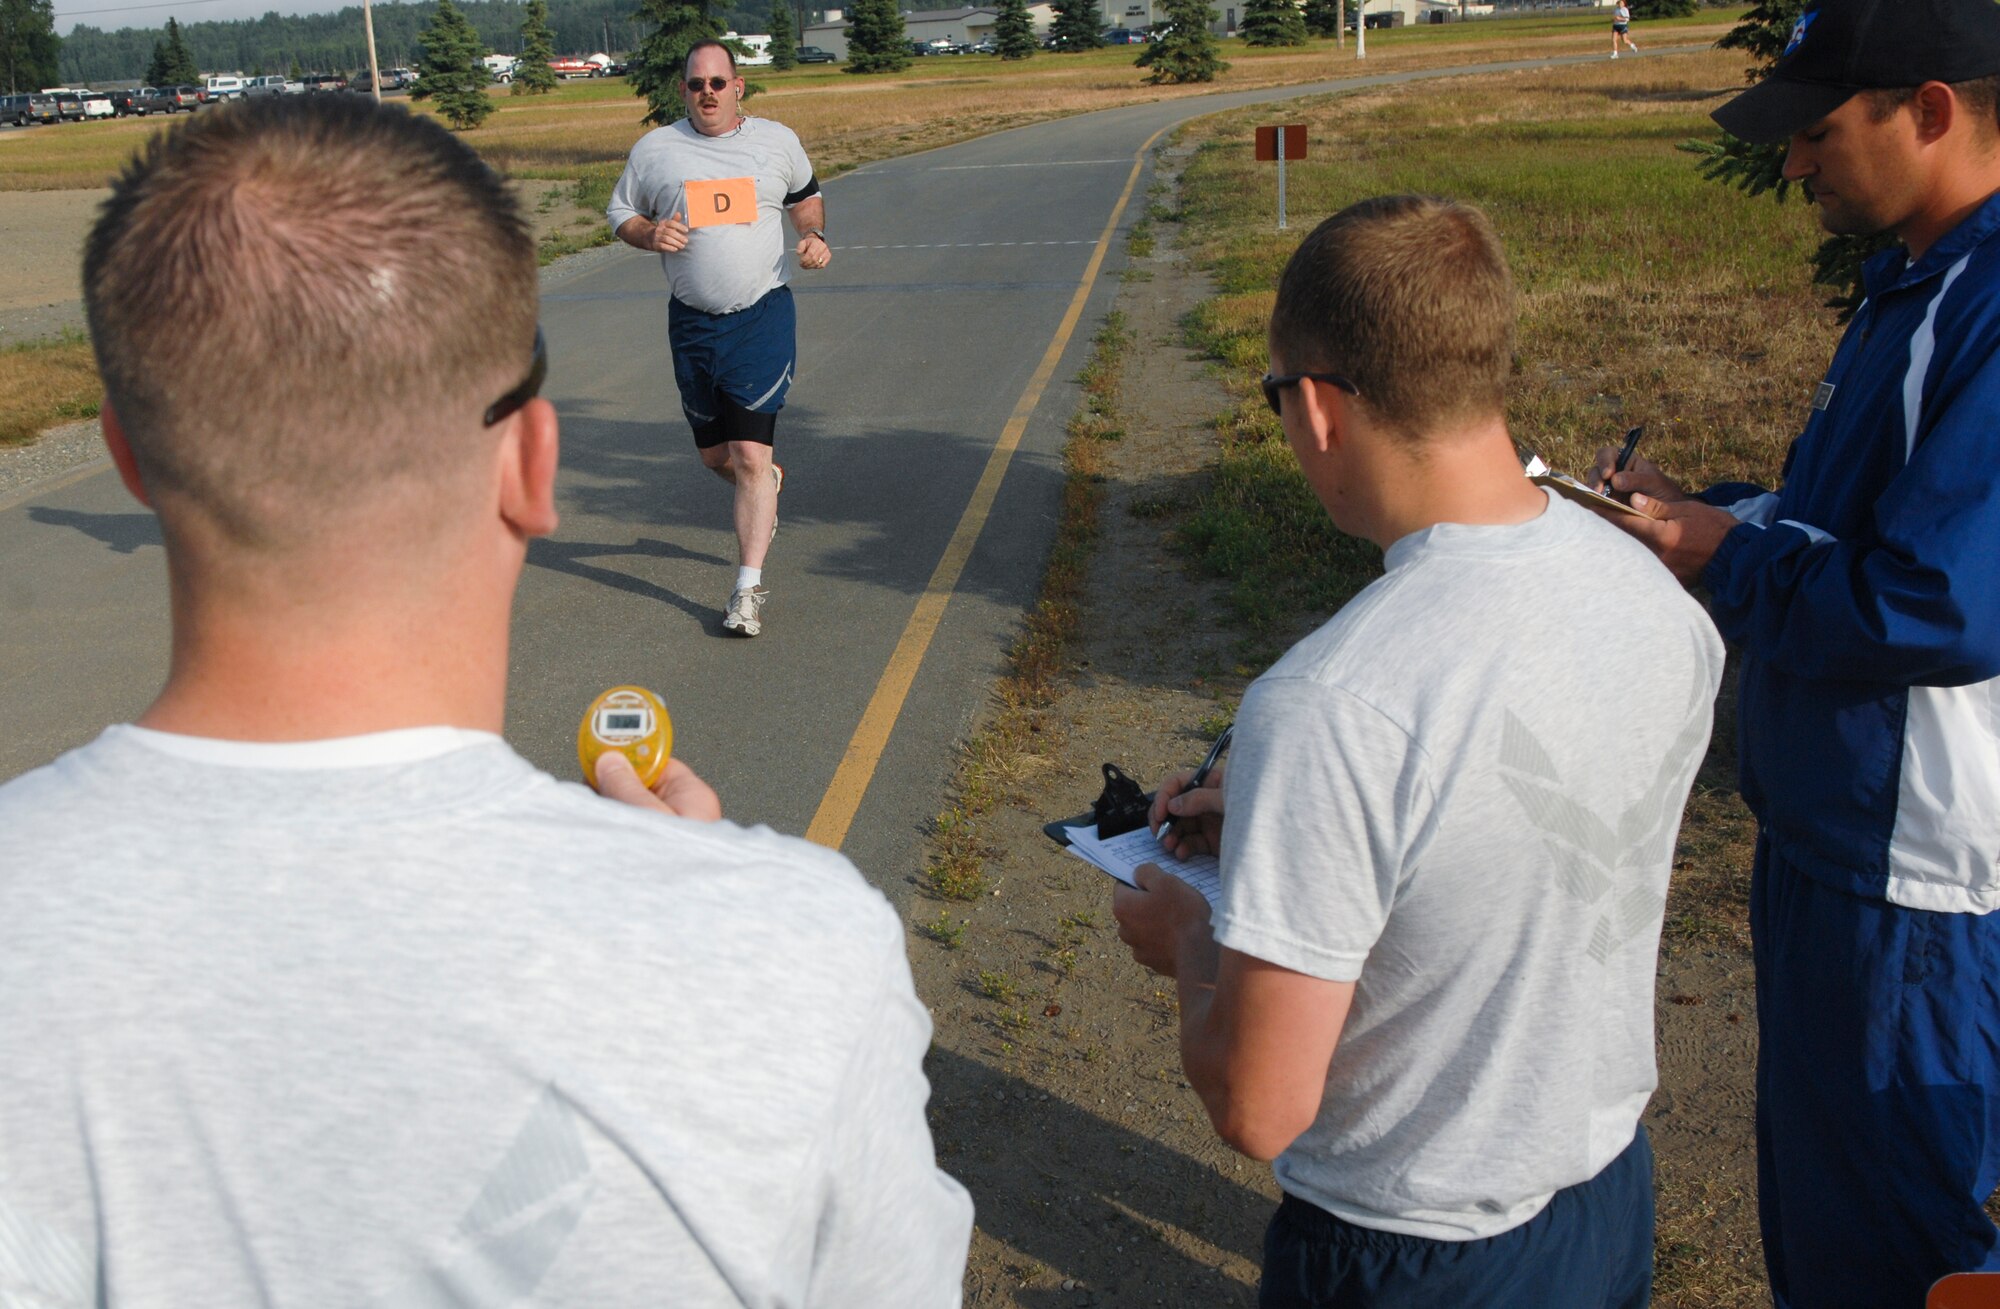 ELMENDORF AIR FORCE BASE, Alaska -- PT test evaluators watch a runner pass the finish line during a testing session July 17. In a joint effort to test all of Elmendorf's Airmen, The Health and Wellness Center has teamed up with physical training leader volunteers from around base to assist with the centralized PT testing. (U.S. Air Force photo/Senior Airman David Carbajal)